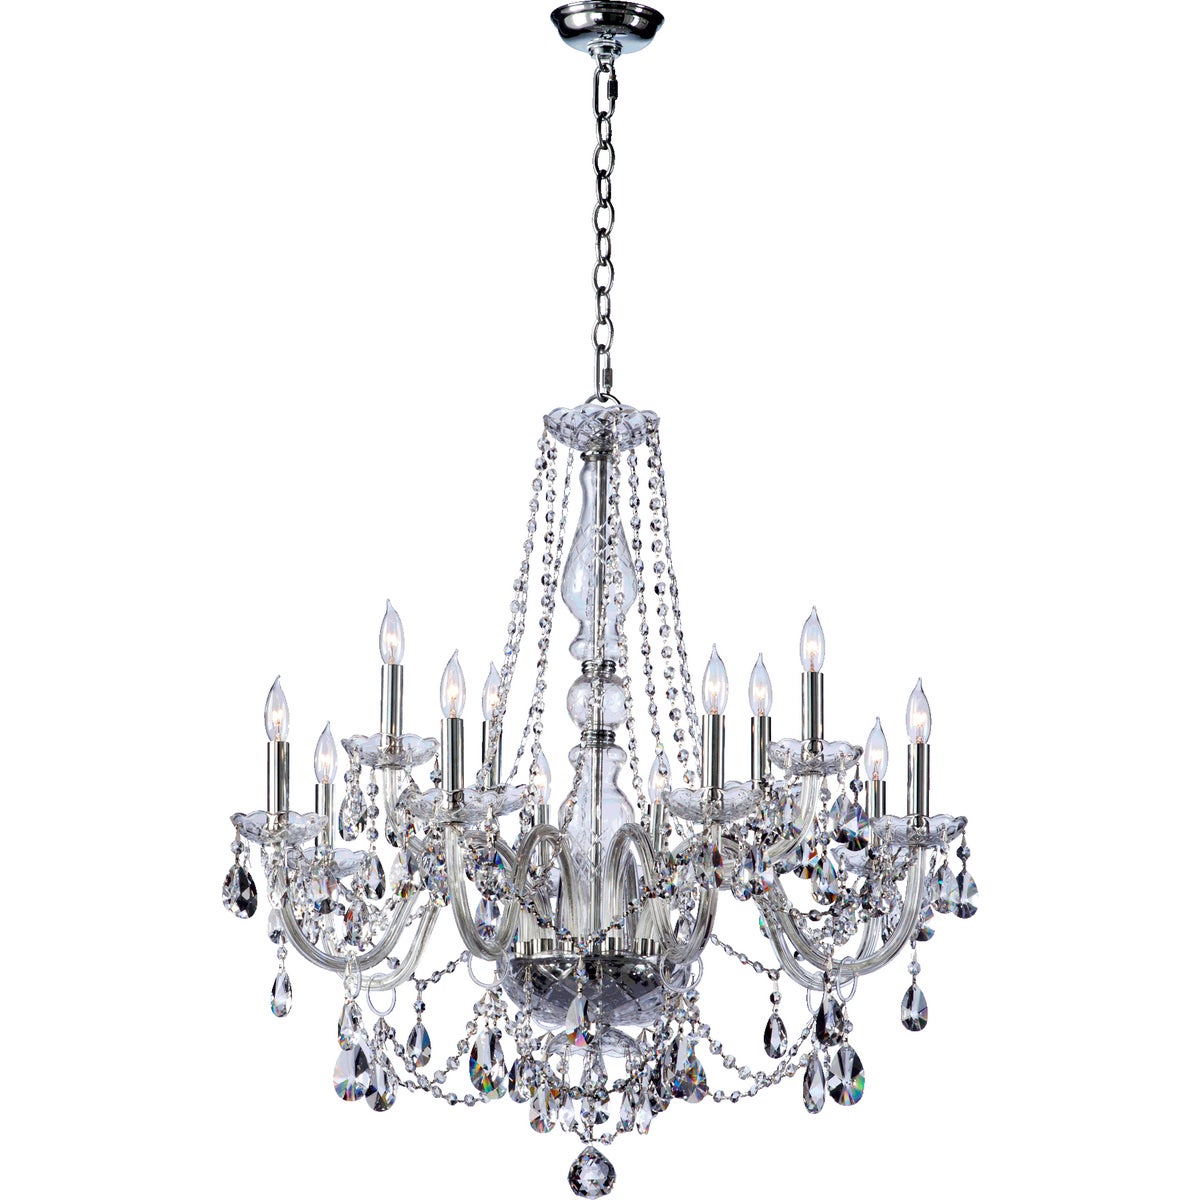 Crystal chandelier with tear drop crystal accents, creating dazzling prismatic effects. Classic design from 1740, updated for modern luxury.